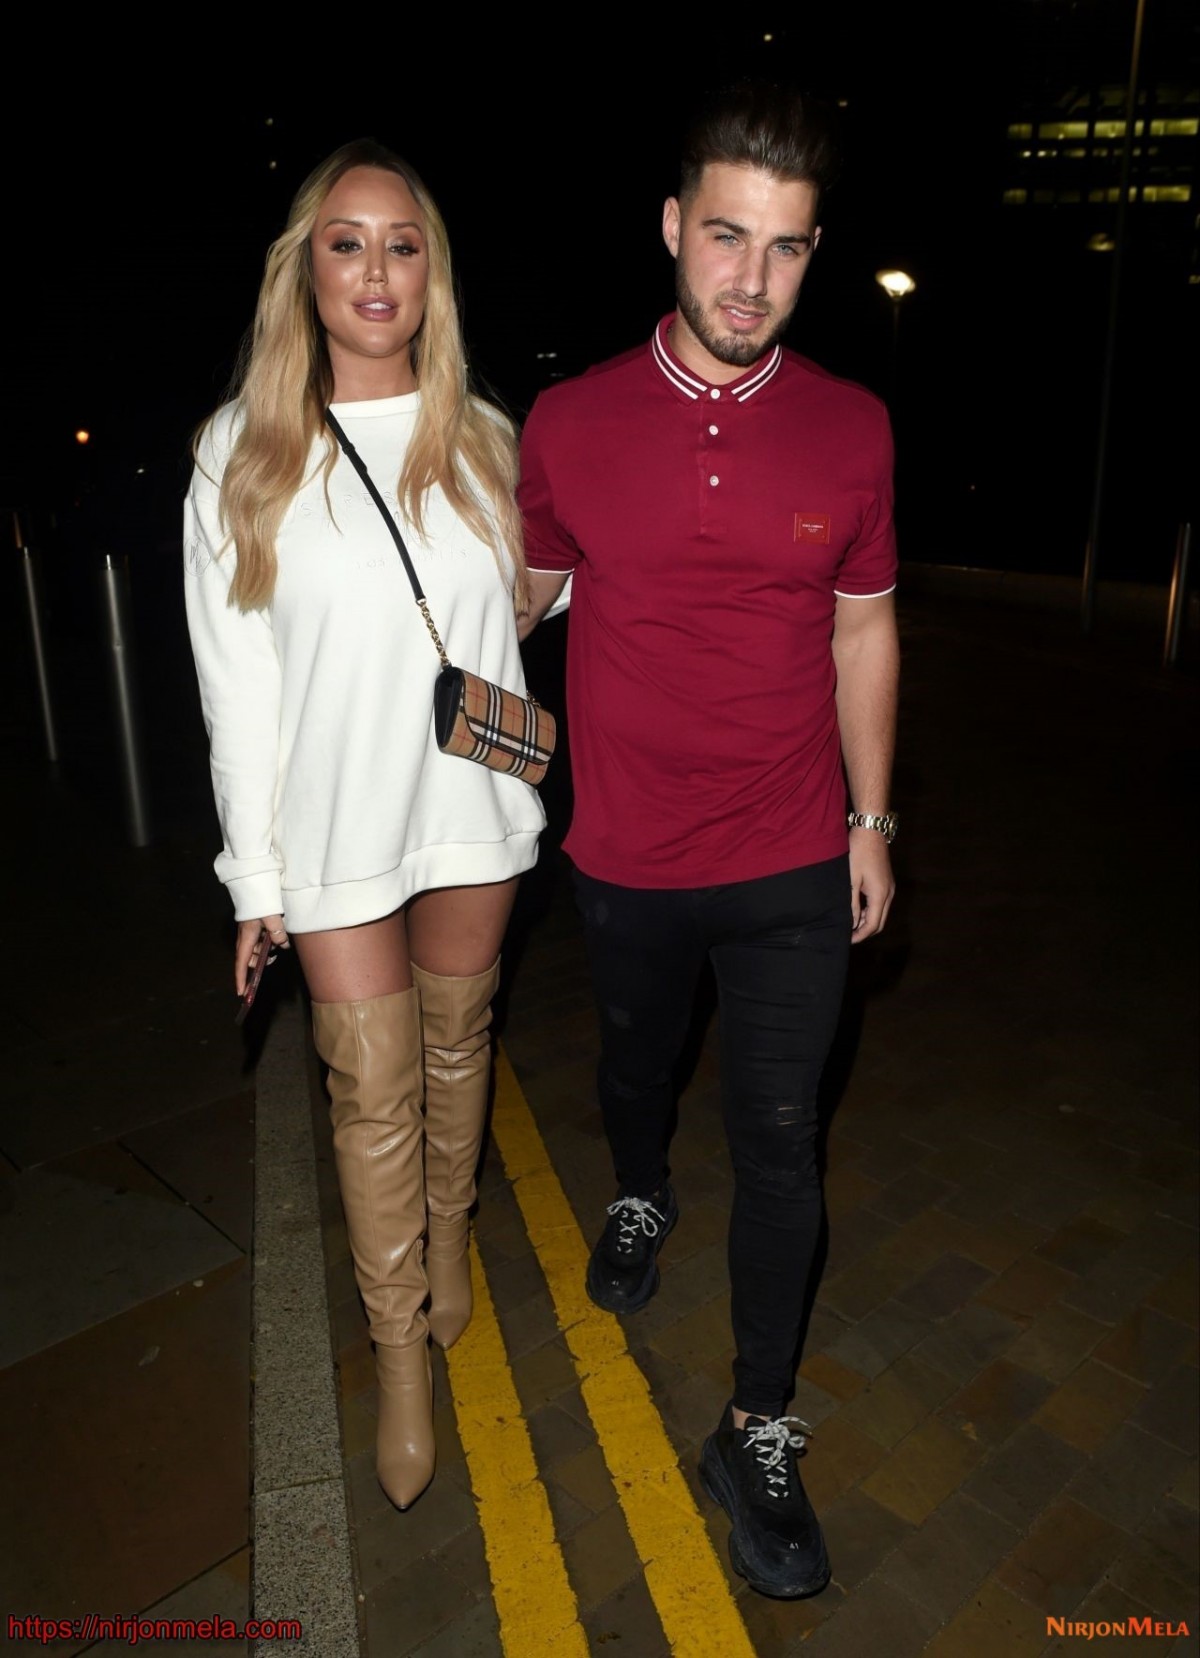 charlotte-crosby-and-josh-ritchie-boxing-night-out-12-26-2018-0.jpg